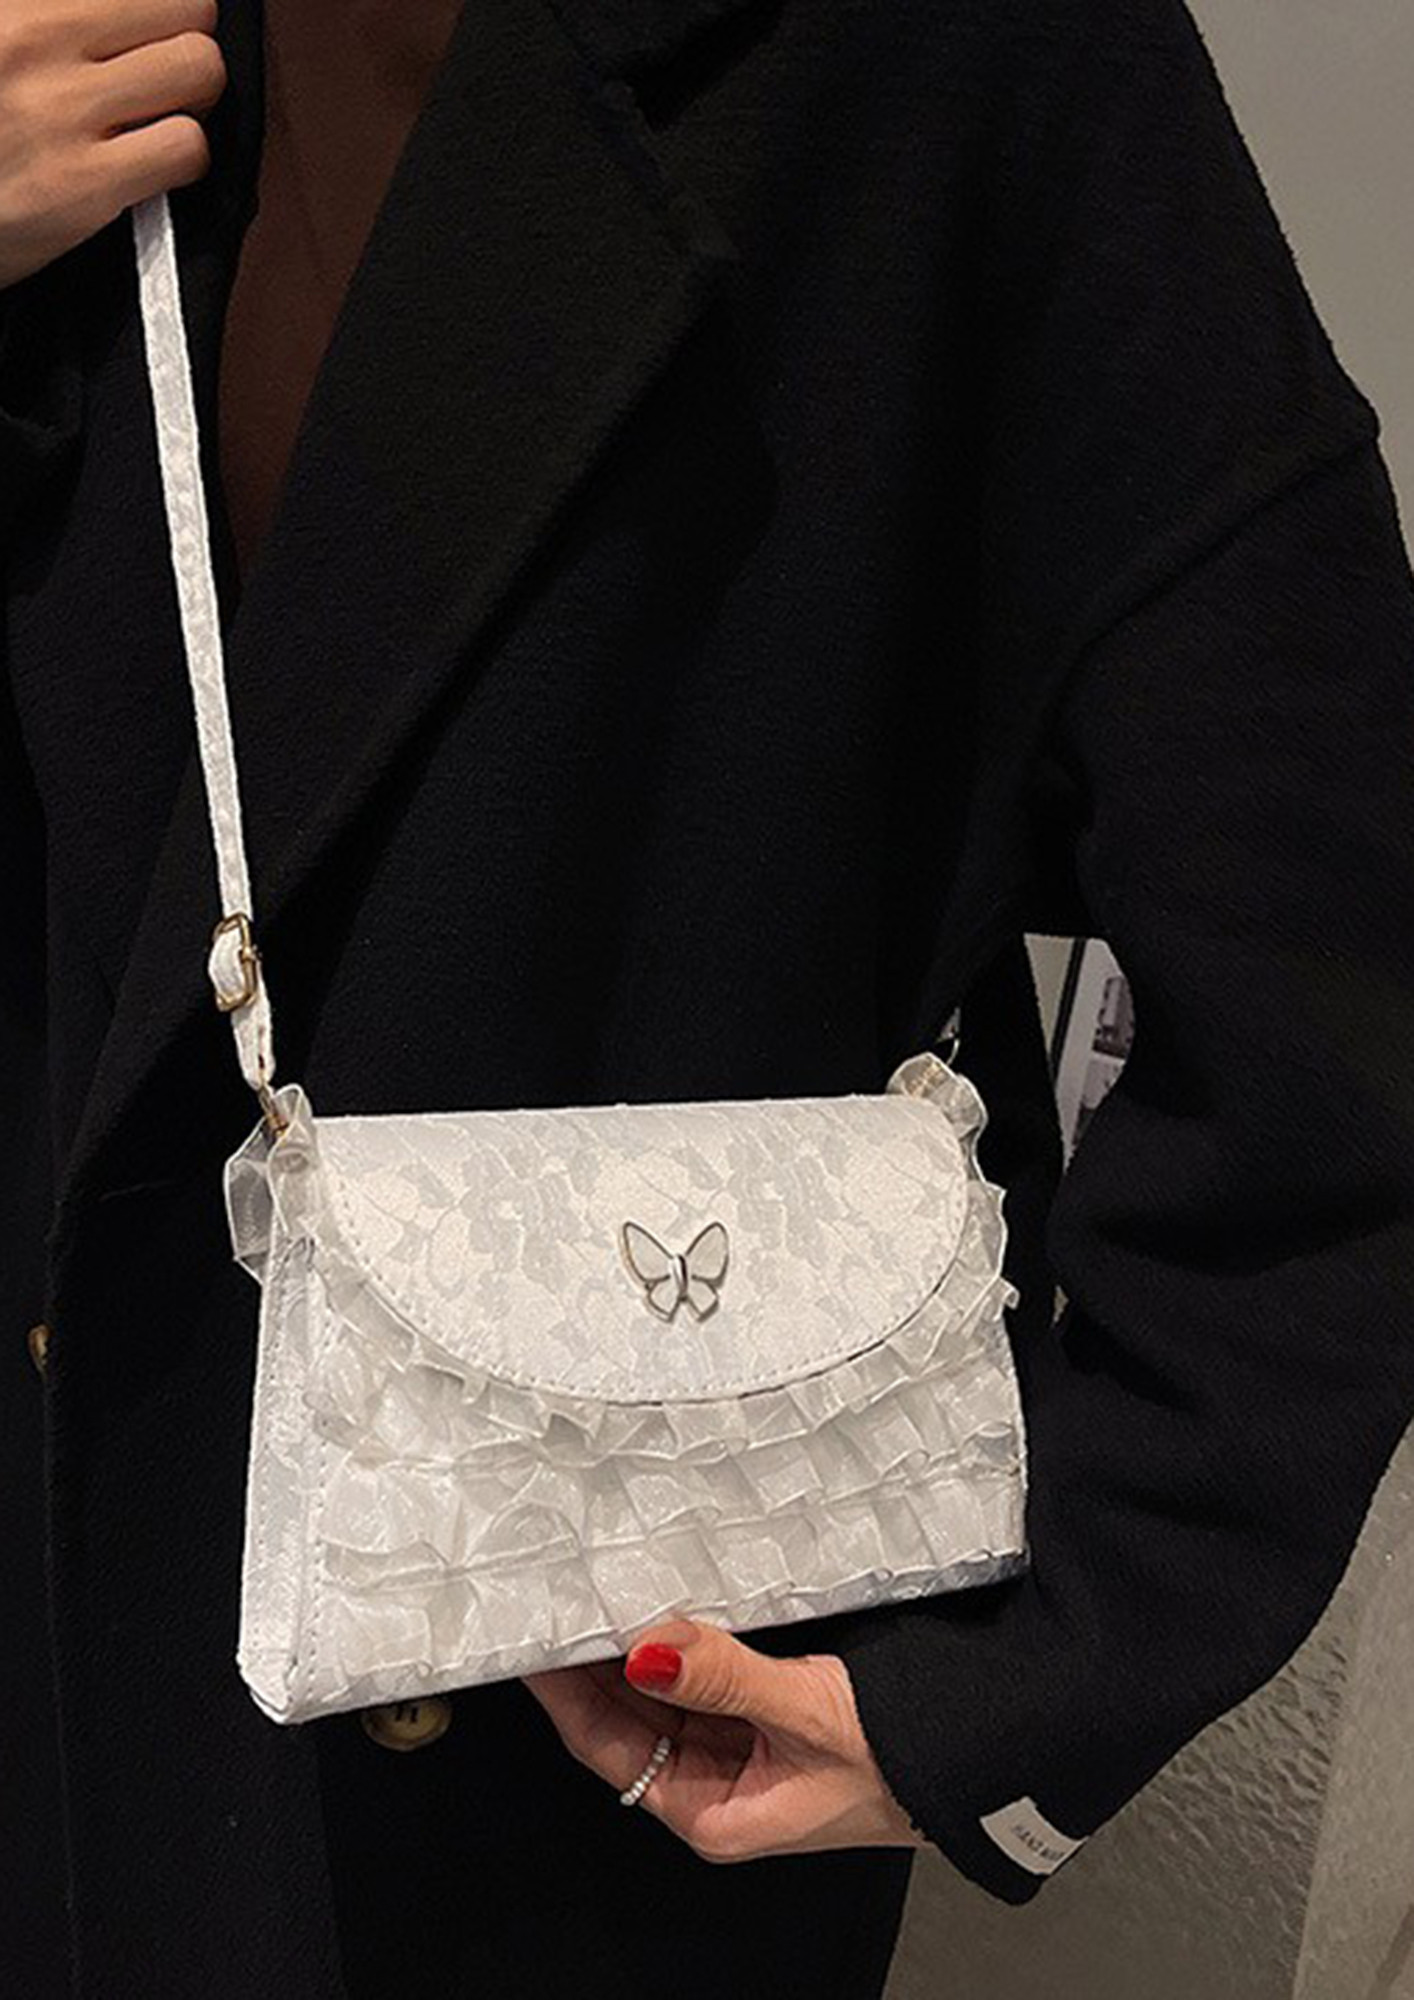 A LITTLE UPBEAT WHITE SLING BAG